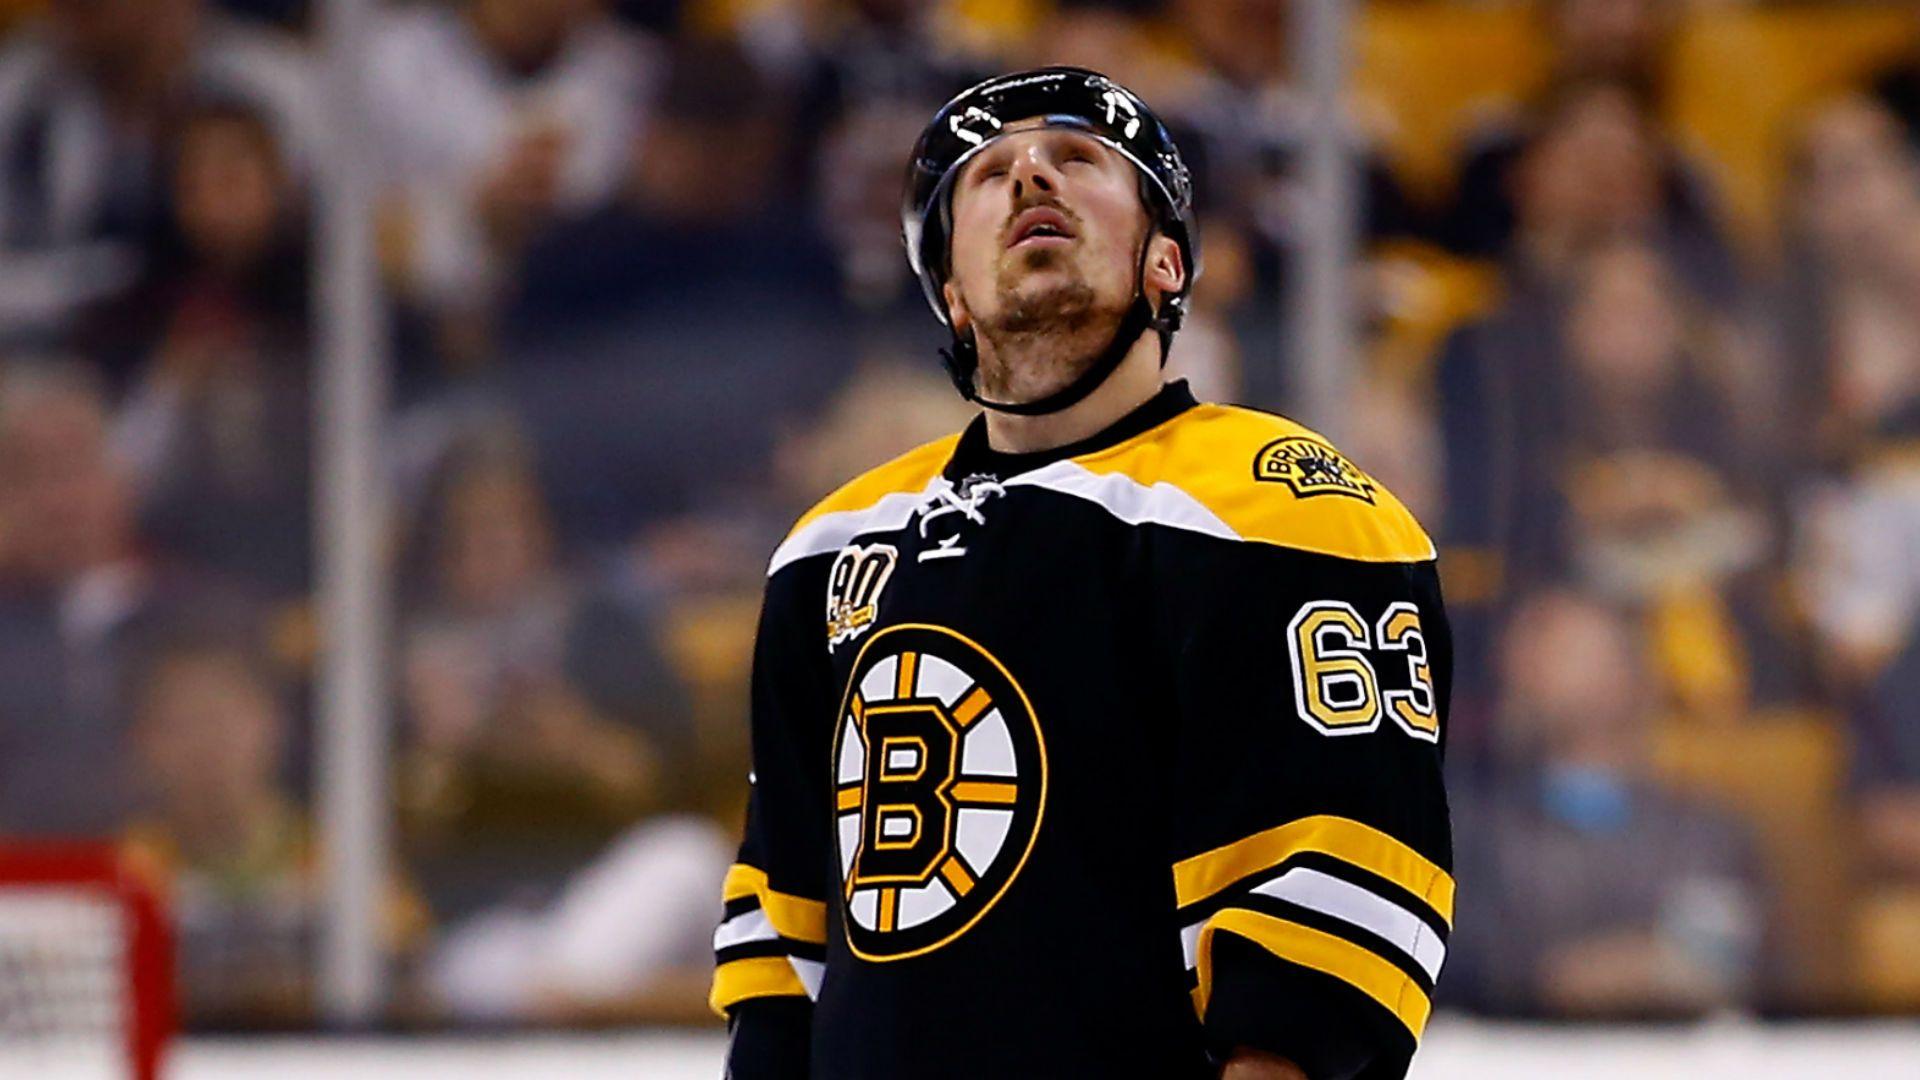 Report: NHL Will Review Possible Slew Foot By Brad Marchand. NHL